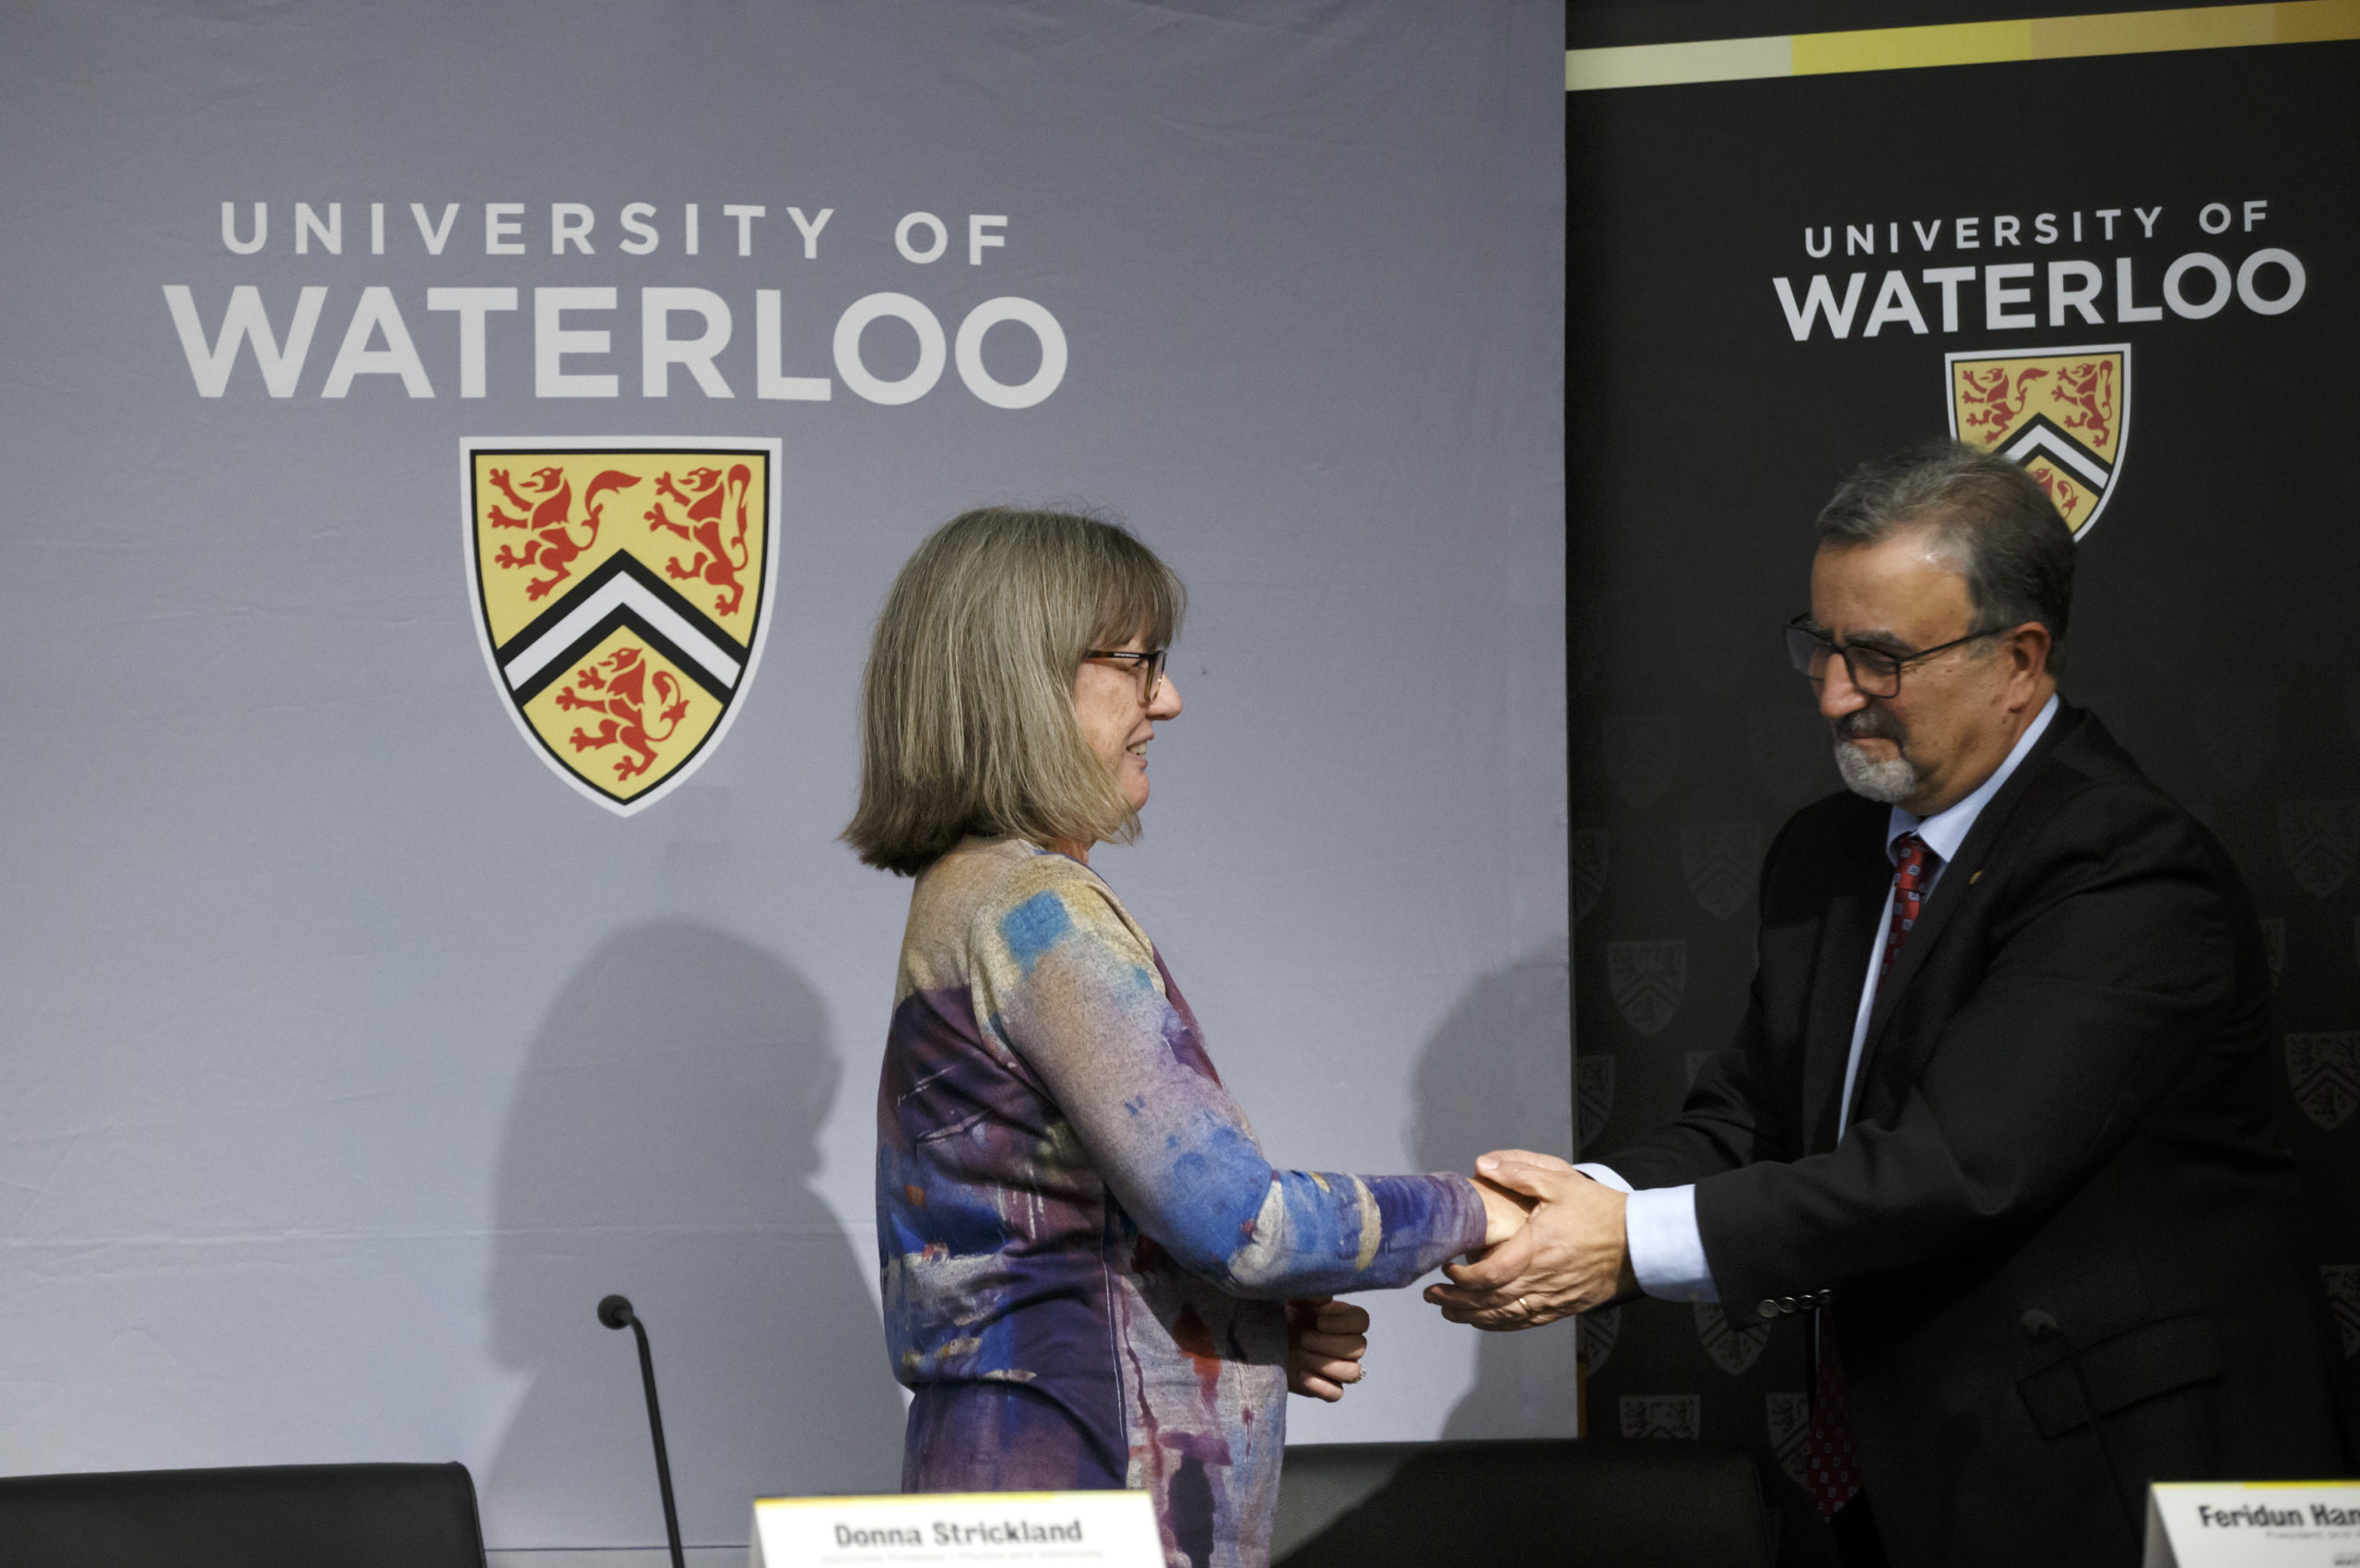 Professor Dr. Donna Strickland is congratulated by University of Waterloo president Feridun Hamdullahpur during a news conference at the University of Waterloo to field questions about her shared Nobel Prize in Physics, October 2, 2018 in Waterloo, Canada. Strickland won for her work on ultrashort lasers. The other two recipients were laser physicists Arthur Ashkin and Gérard Mourou. (Photo by Cole Burston/Getty Images)